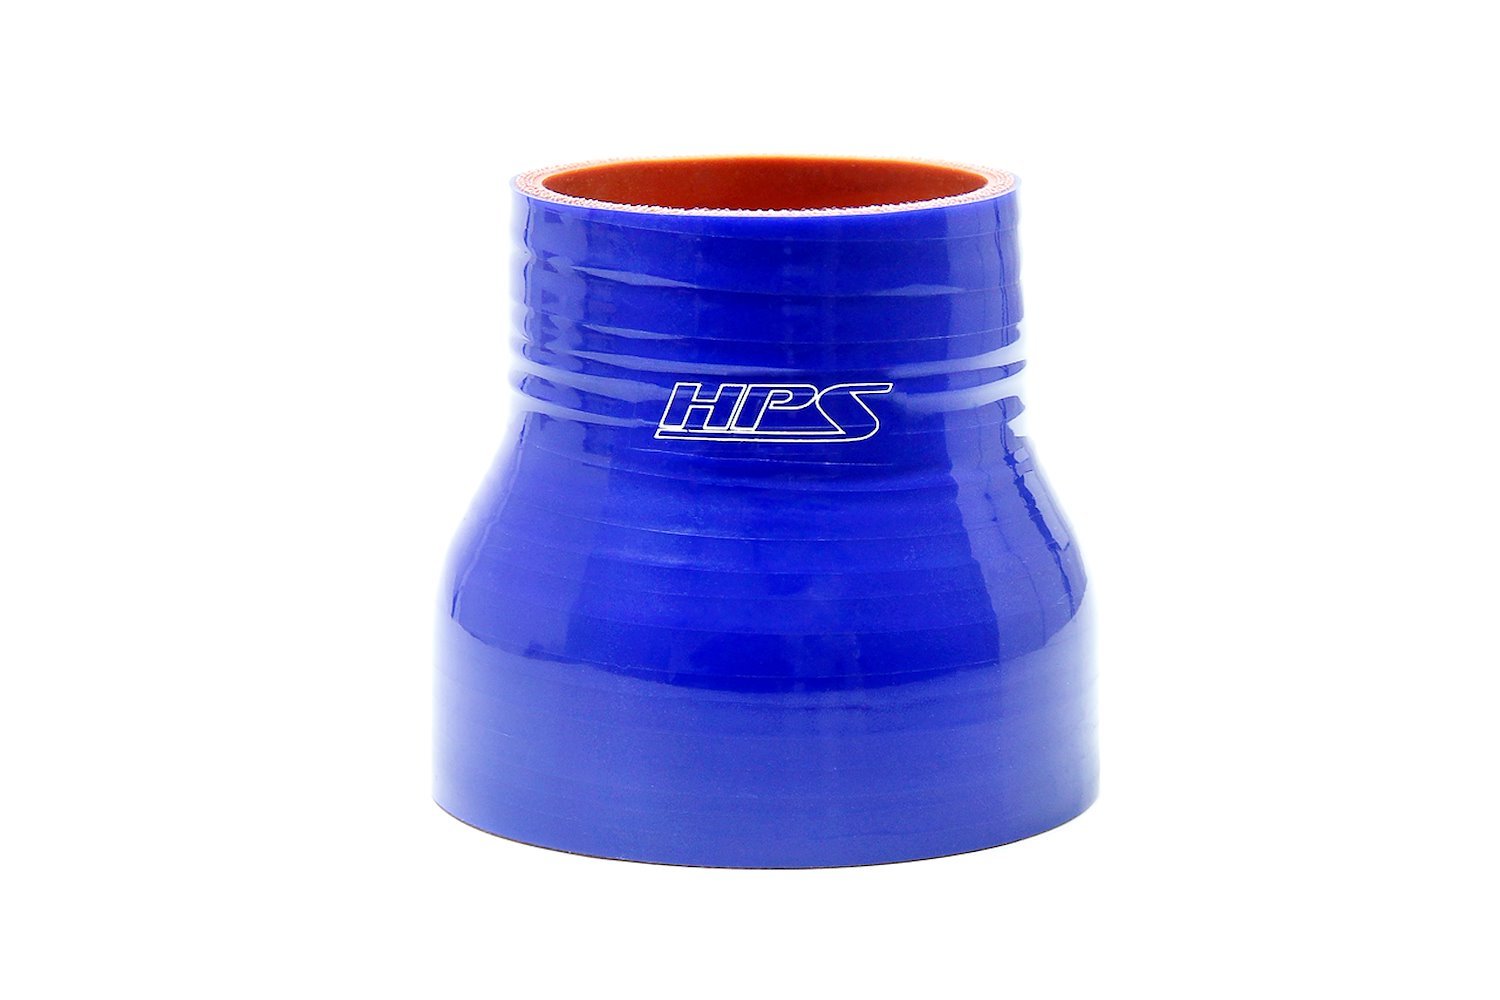 HTSR-300-400-BLUE Silicone Reducer Hose, High-Temp 4-Ply Reinforced, 3 in. - 4 in. ID, 3 in. Long, Blue